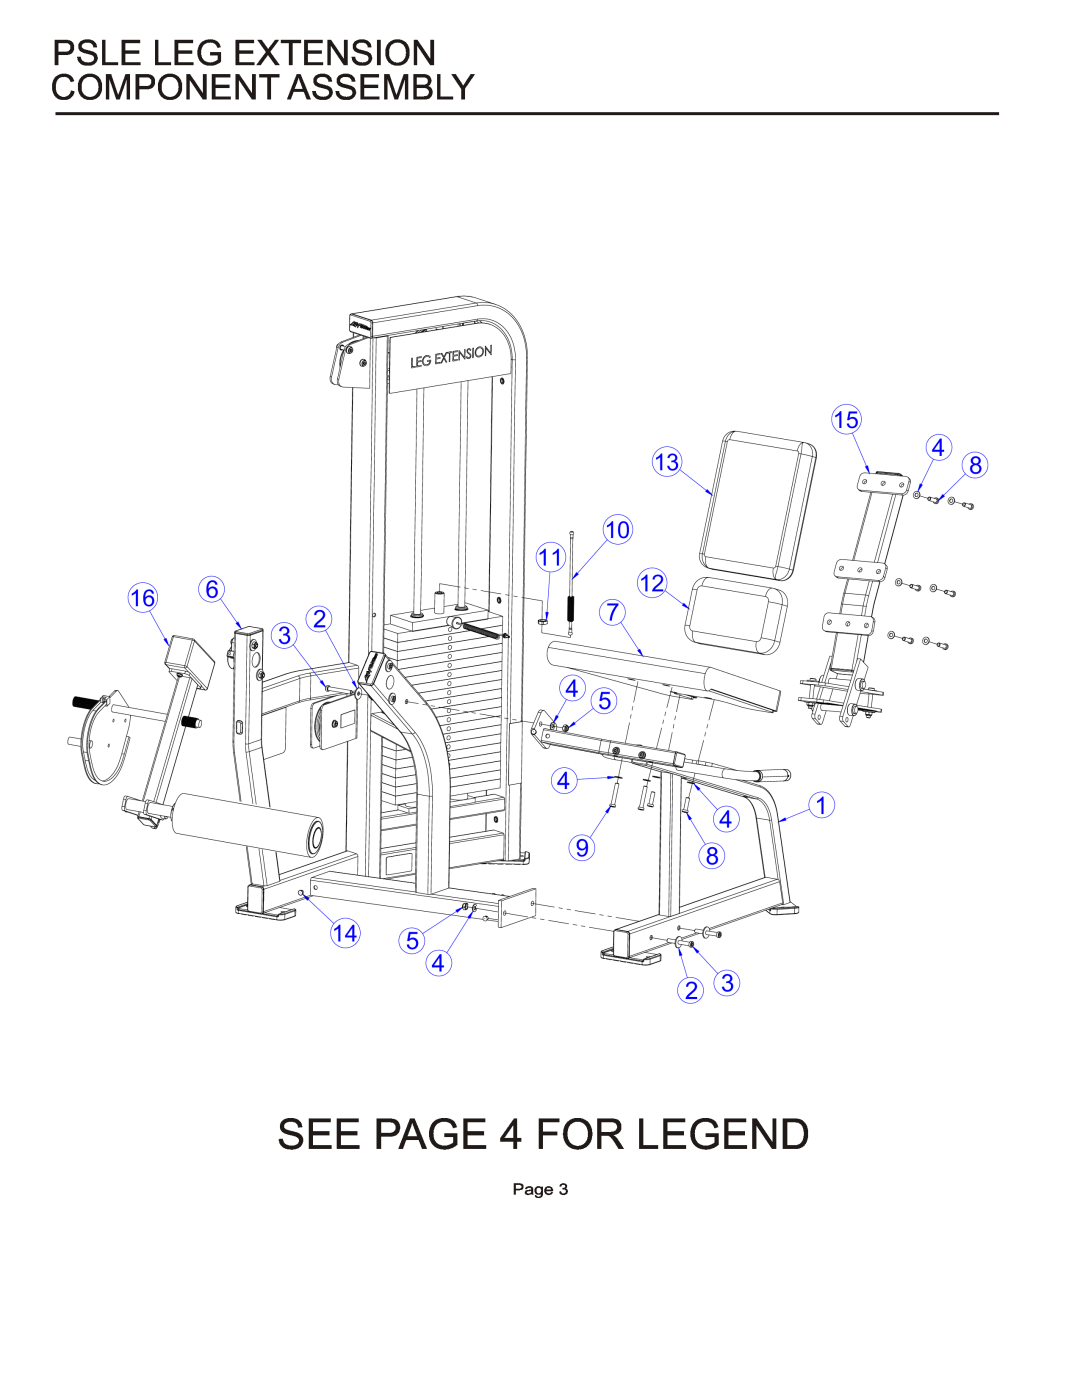 Life Fitness PSLE manual SEE PAGE 4 FOR LEGEND, Psle Leg Extension Component Assembly, Page 